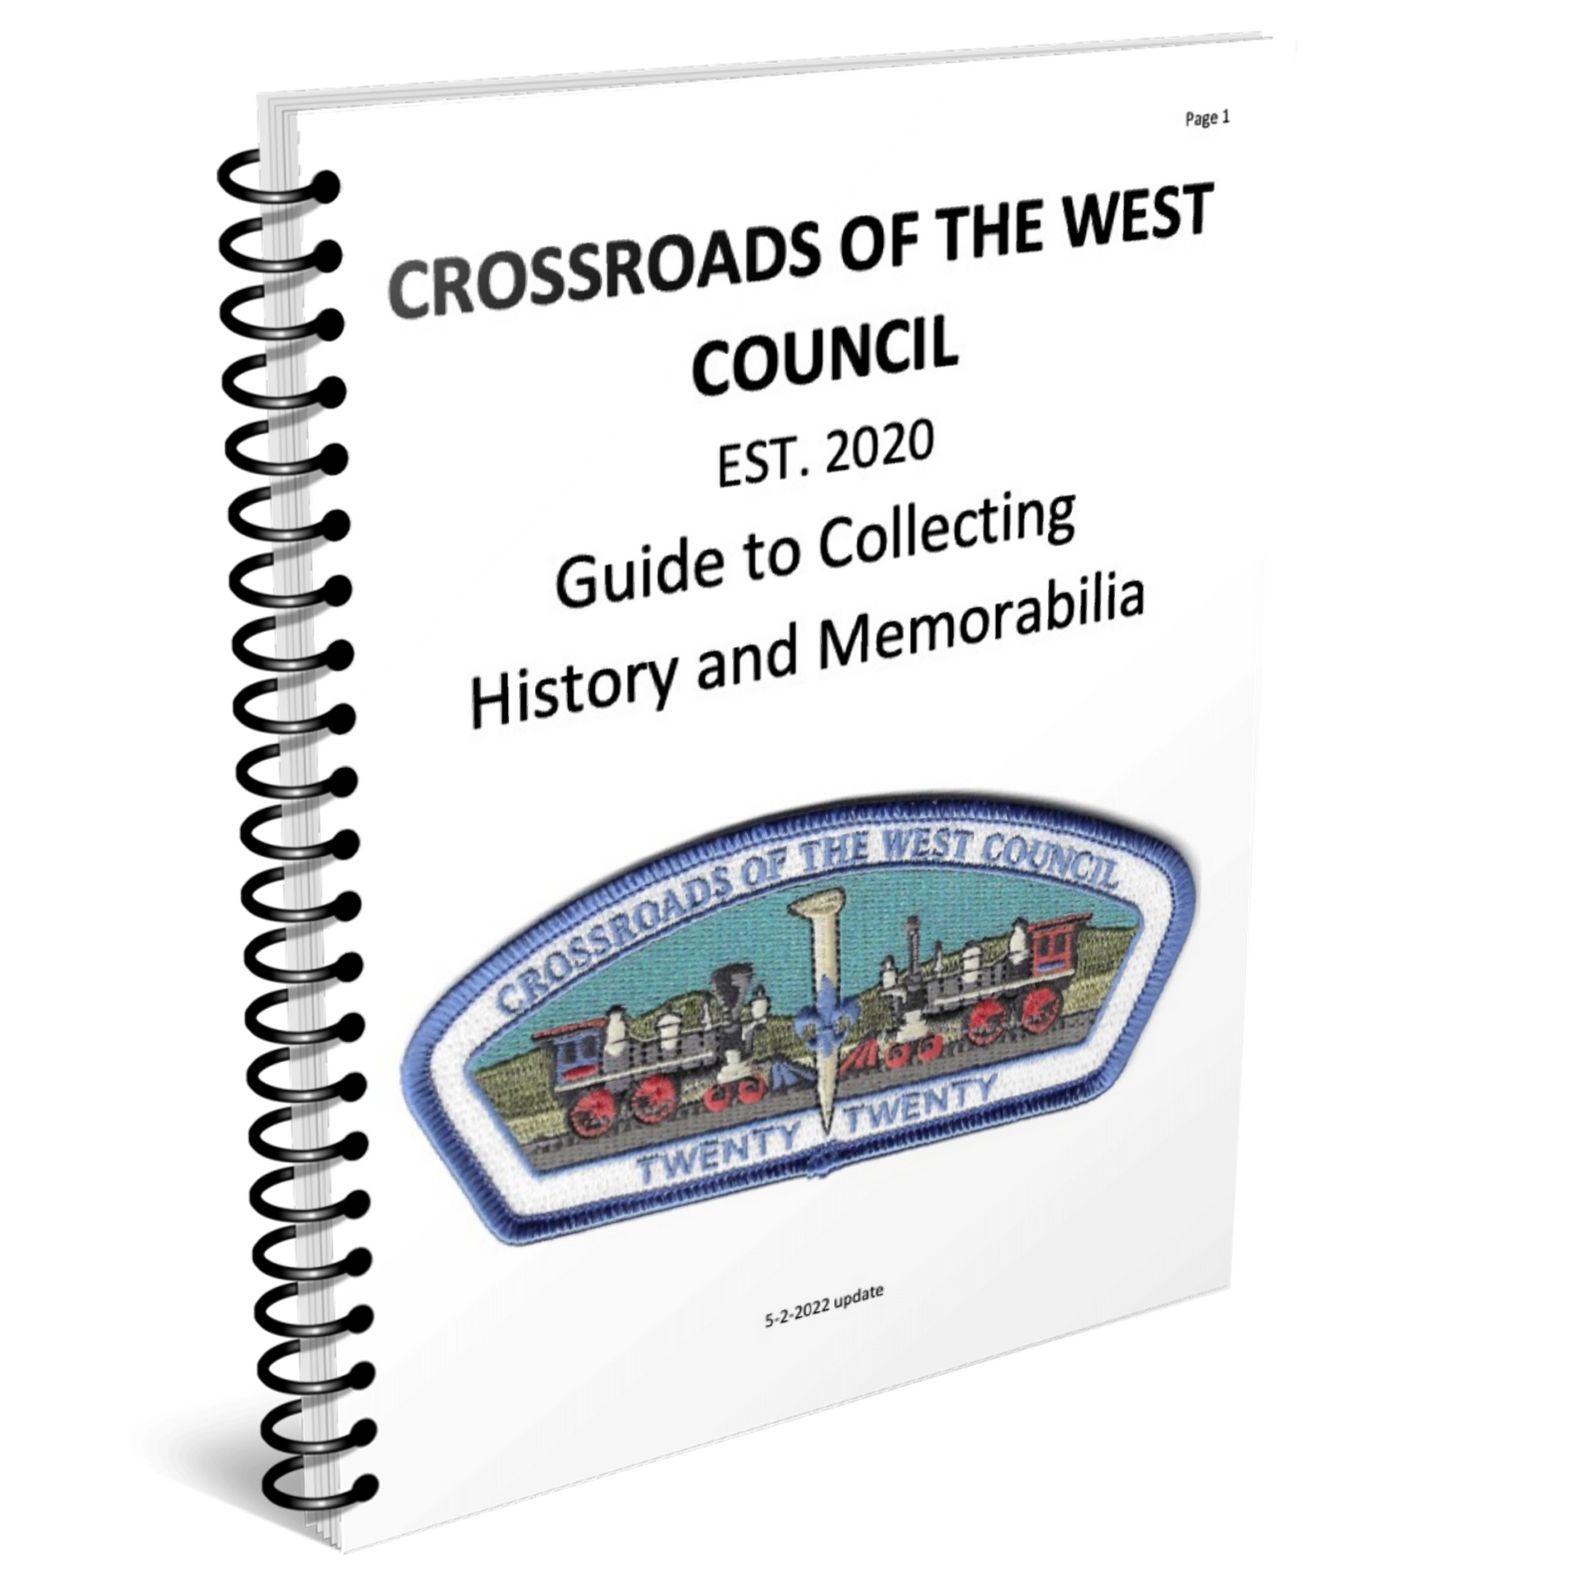 Guide to Collecting Council 590 Crossroads of the West — Eagle Peak